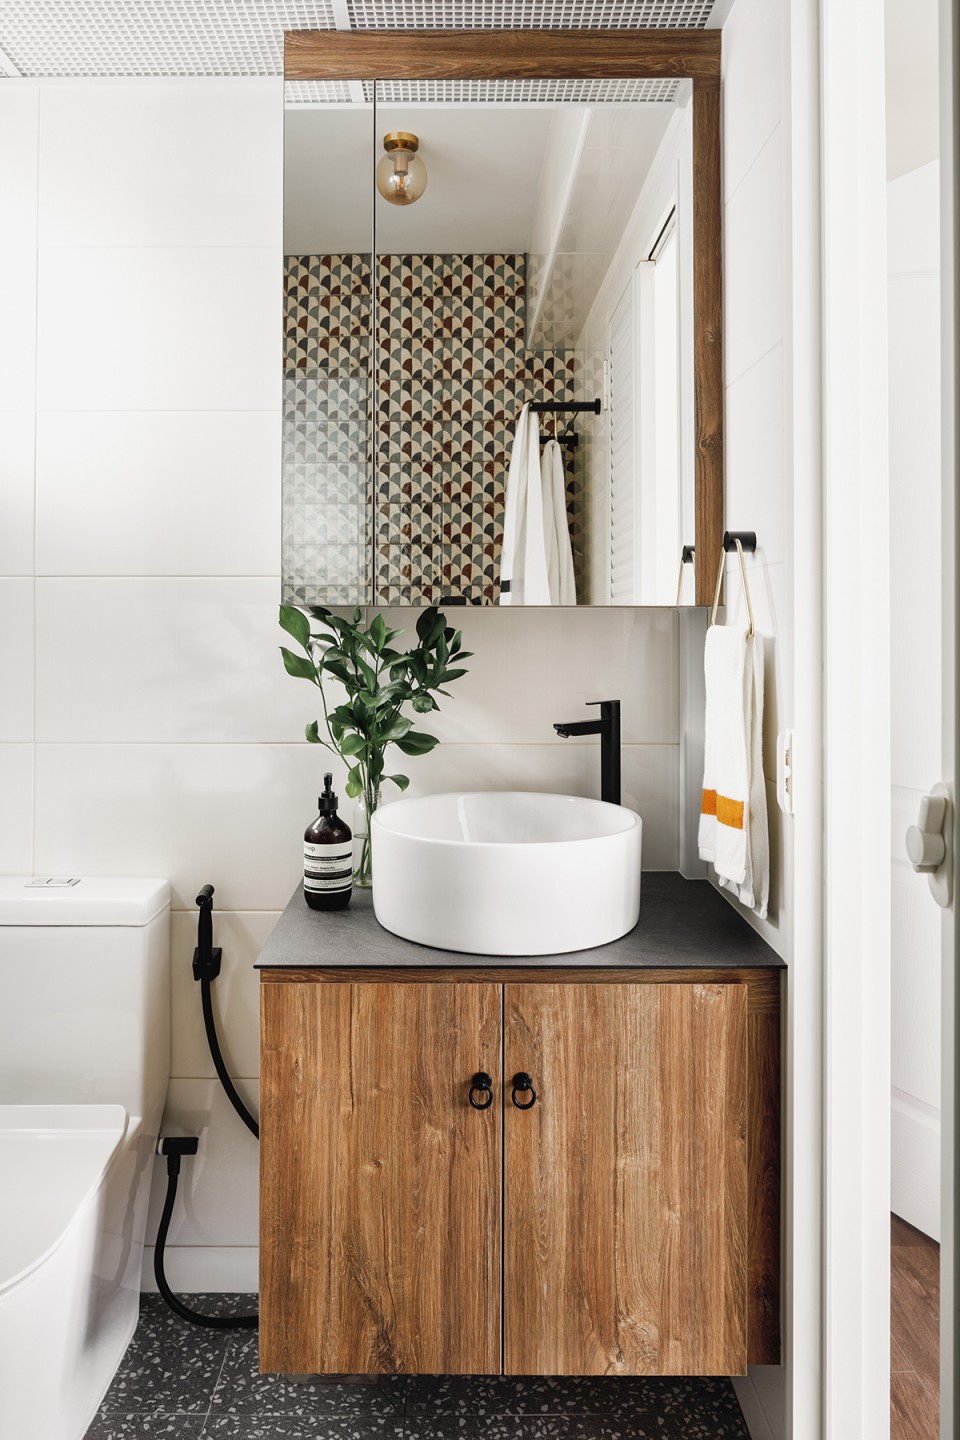 squarerooms cnbrr home fazlie corinne instagram bto flat account hdb homeowners interview singapore canberra mediterranean inspired design apartment style bathroom wood vamity patterned shower tiles countertop sink